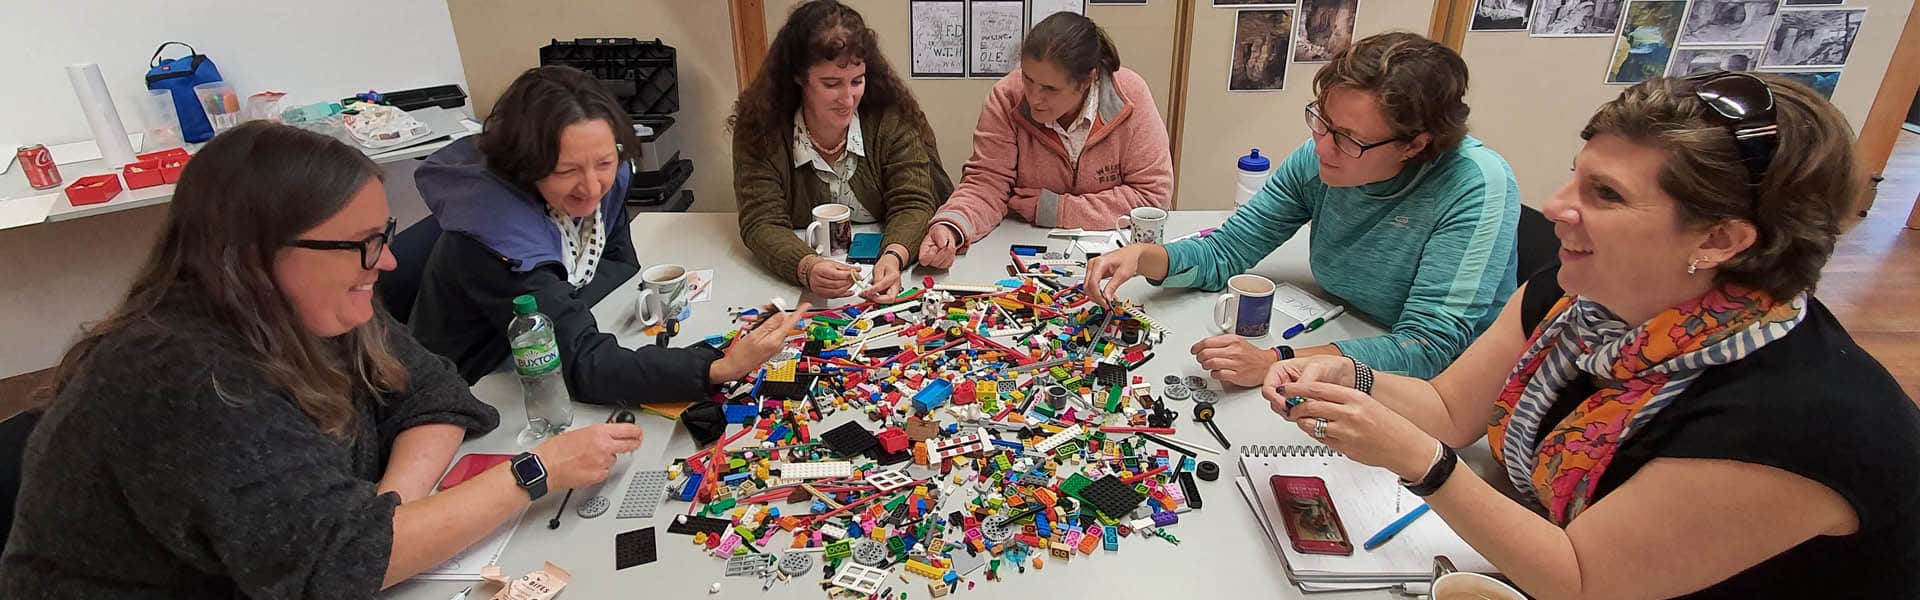 6 women sitting at a table using a huge pile of LEGO